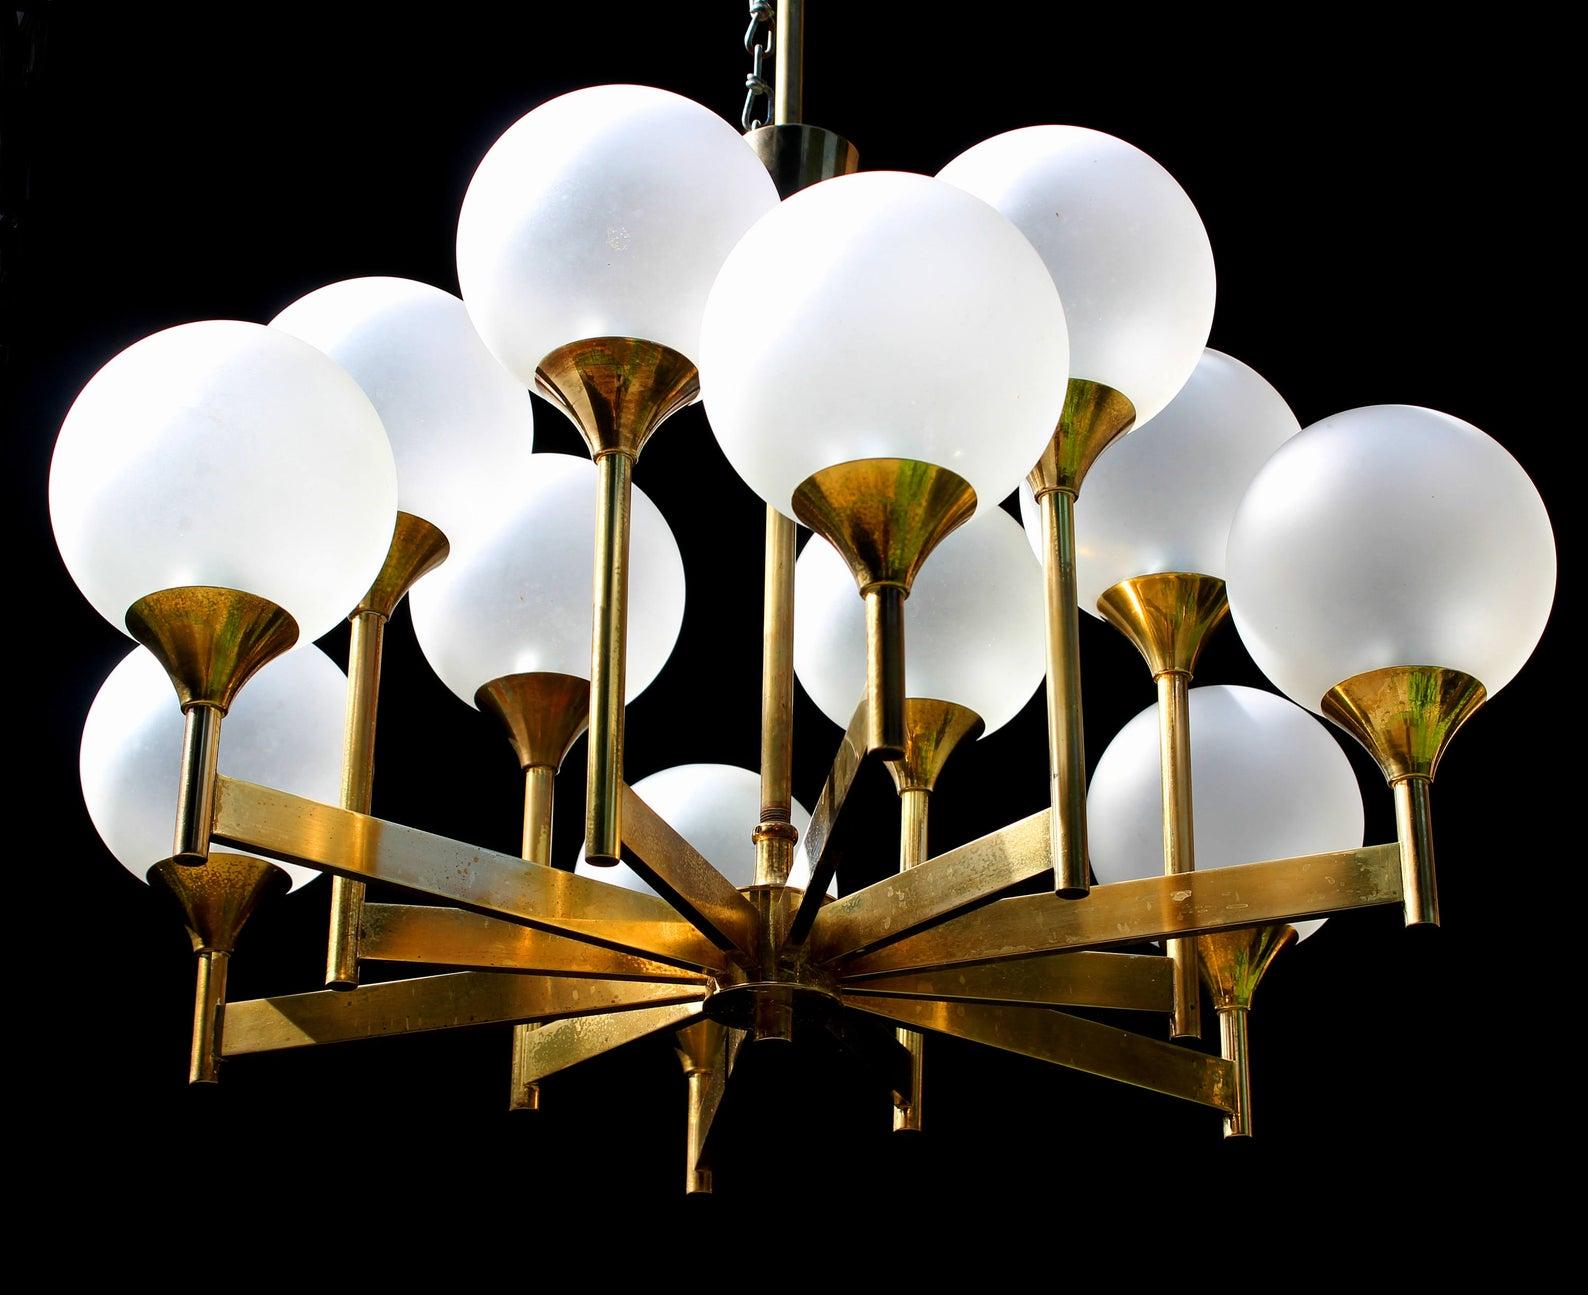 Fine organic chandelier with frosted glass globes and brass. 12-light (e14)

Measures: Diameter 26